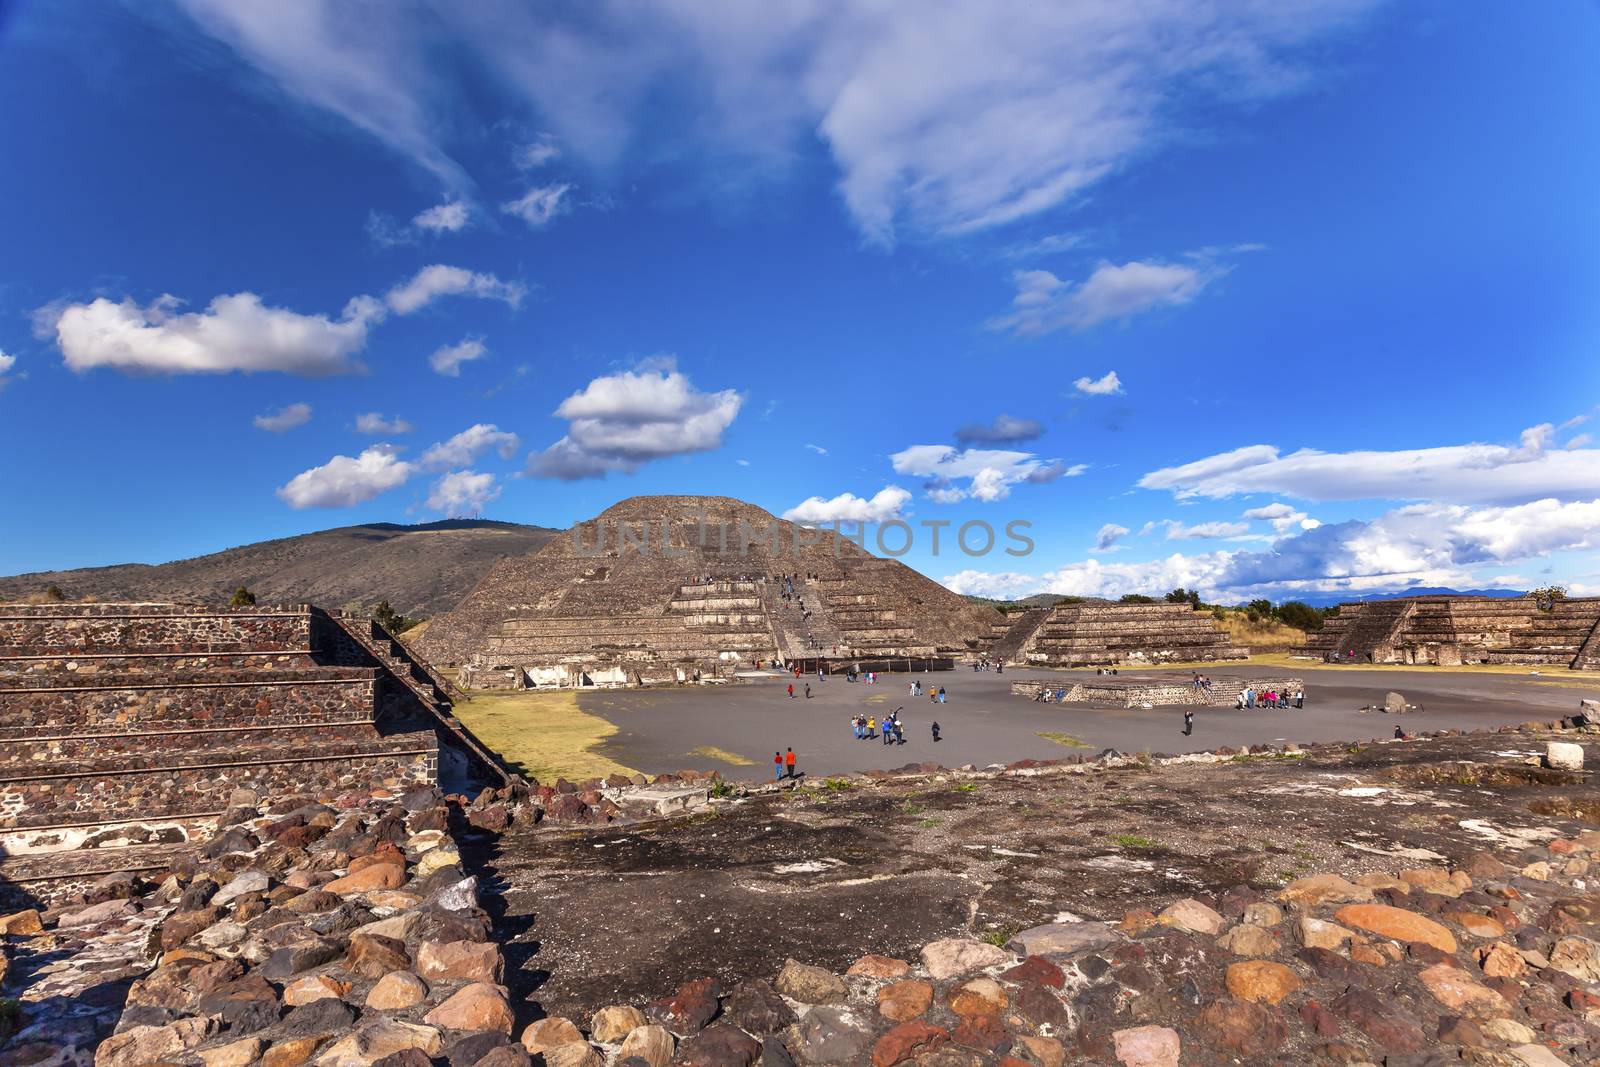 Avenue of Dead Temple of Moon Pyramid Teotihuacan Mexico City Mexico